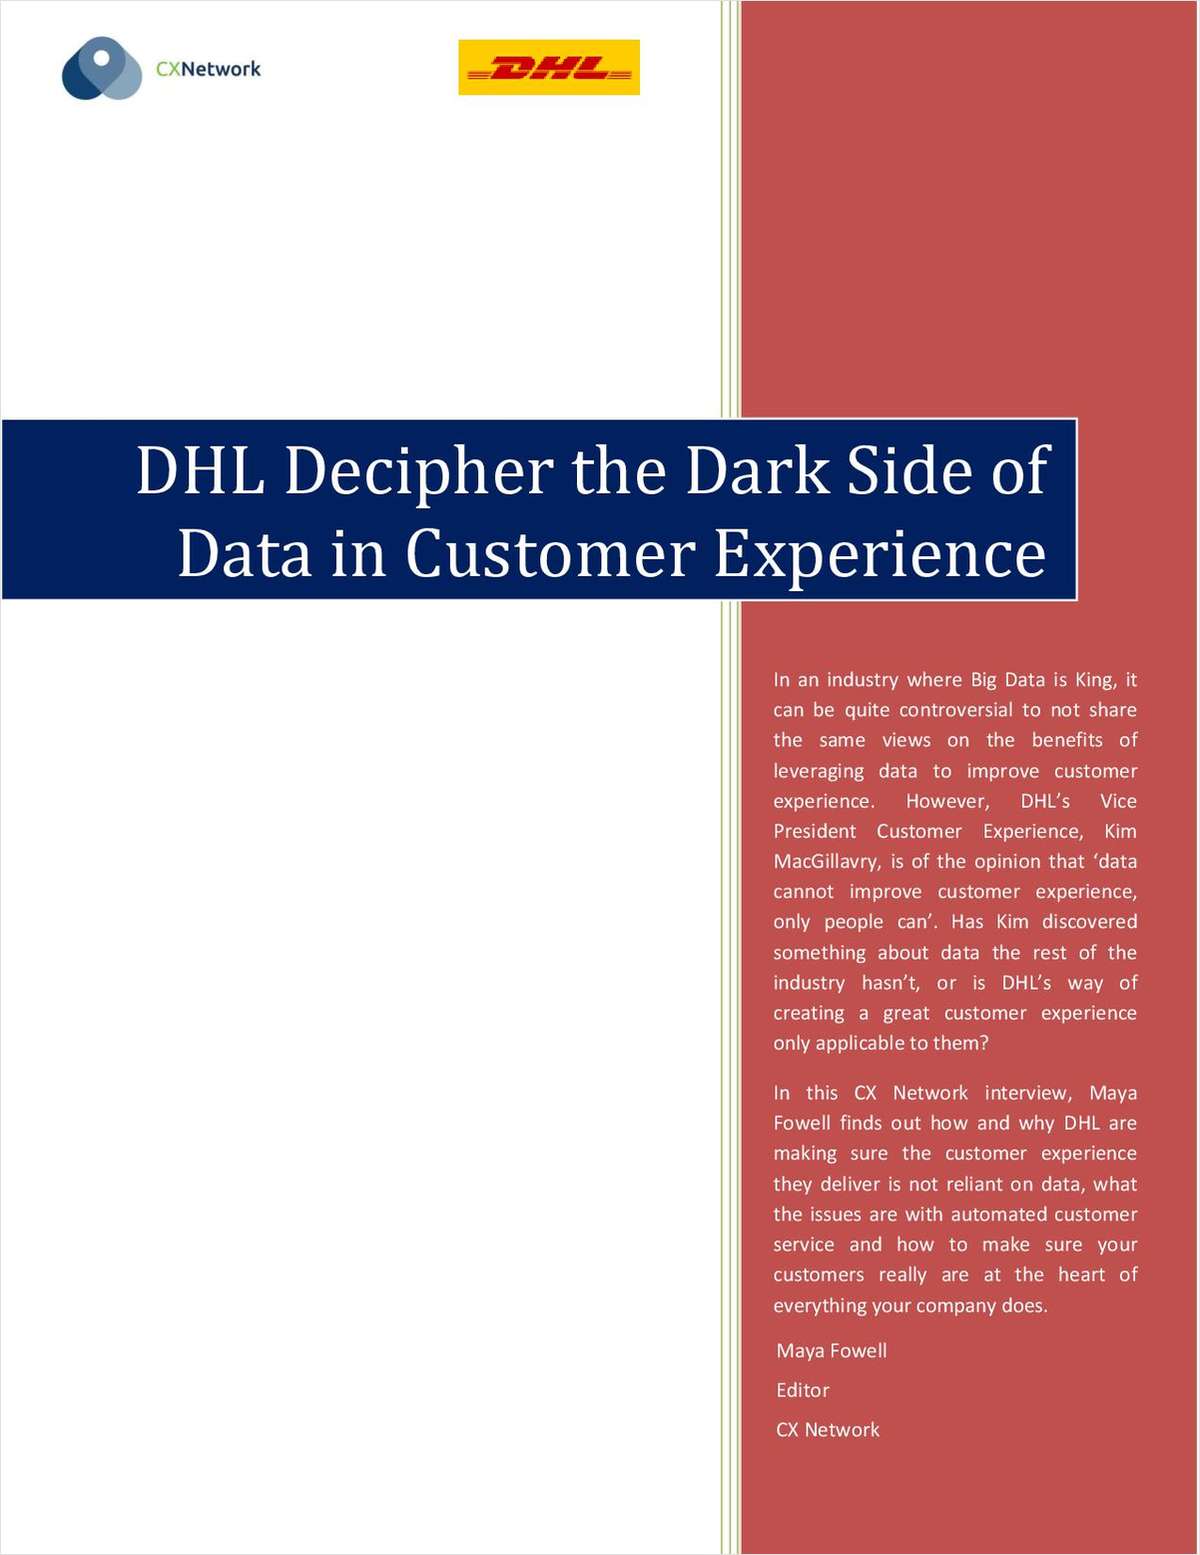 DHL Decipher the Dark Side of Data in Customer Experience